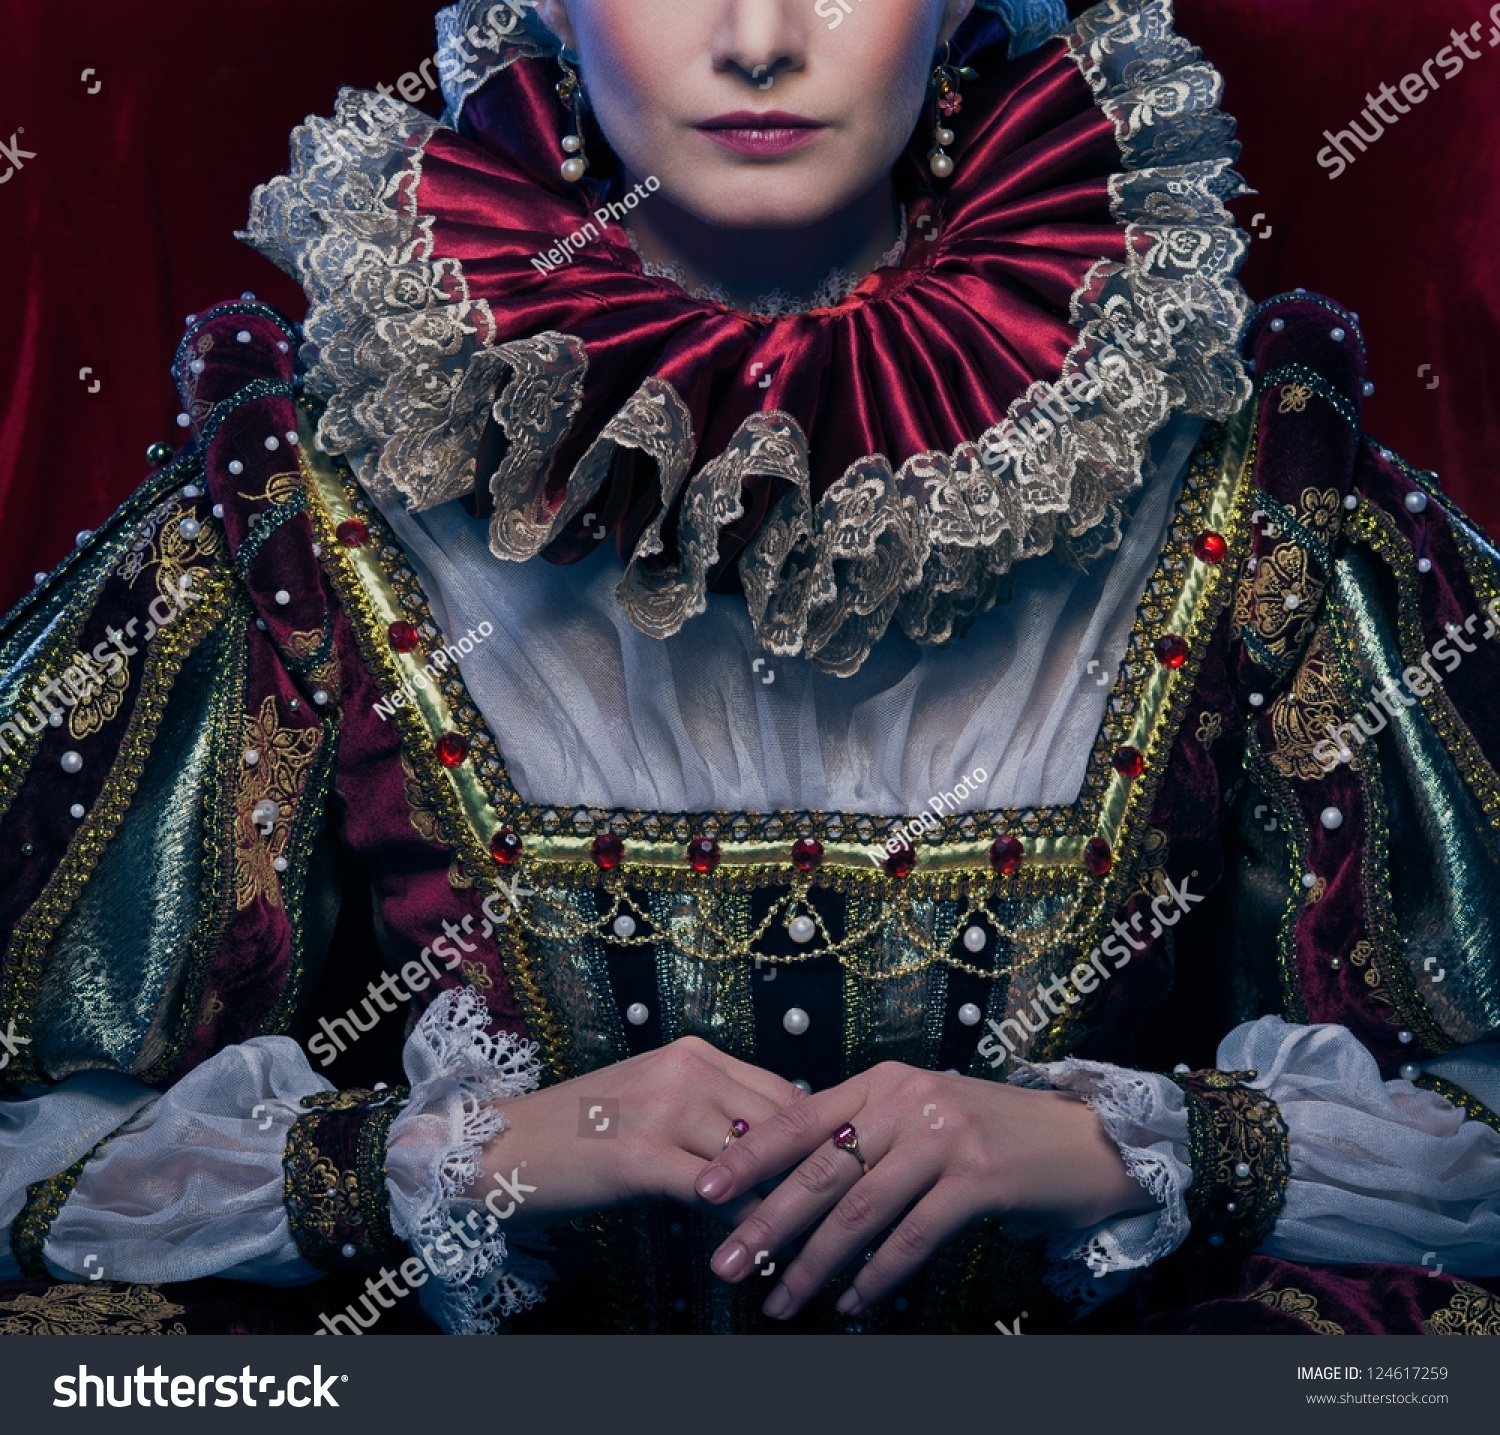 Queen in royal dress and luxuriant collar #124617259